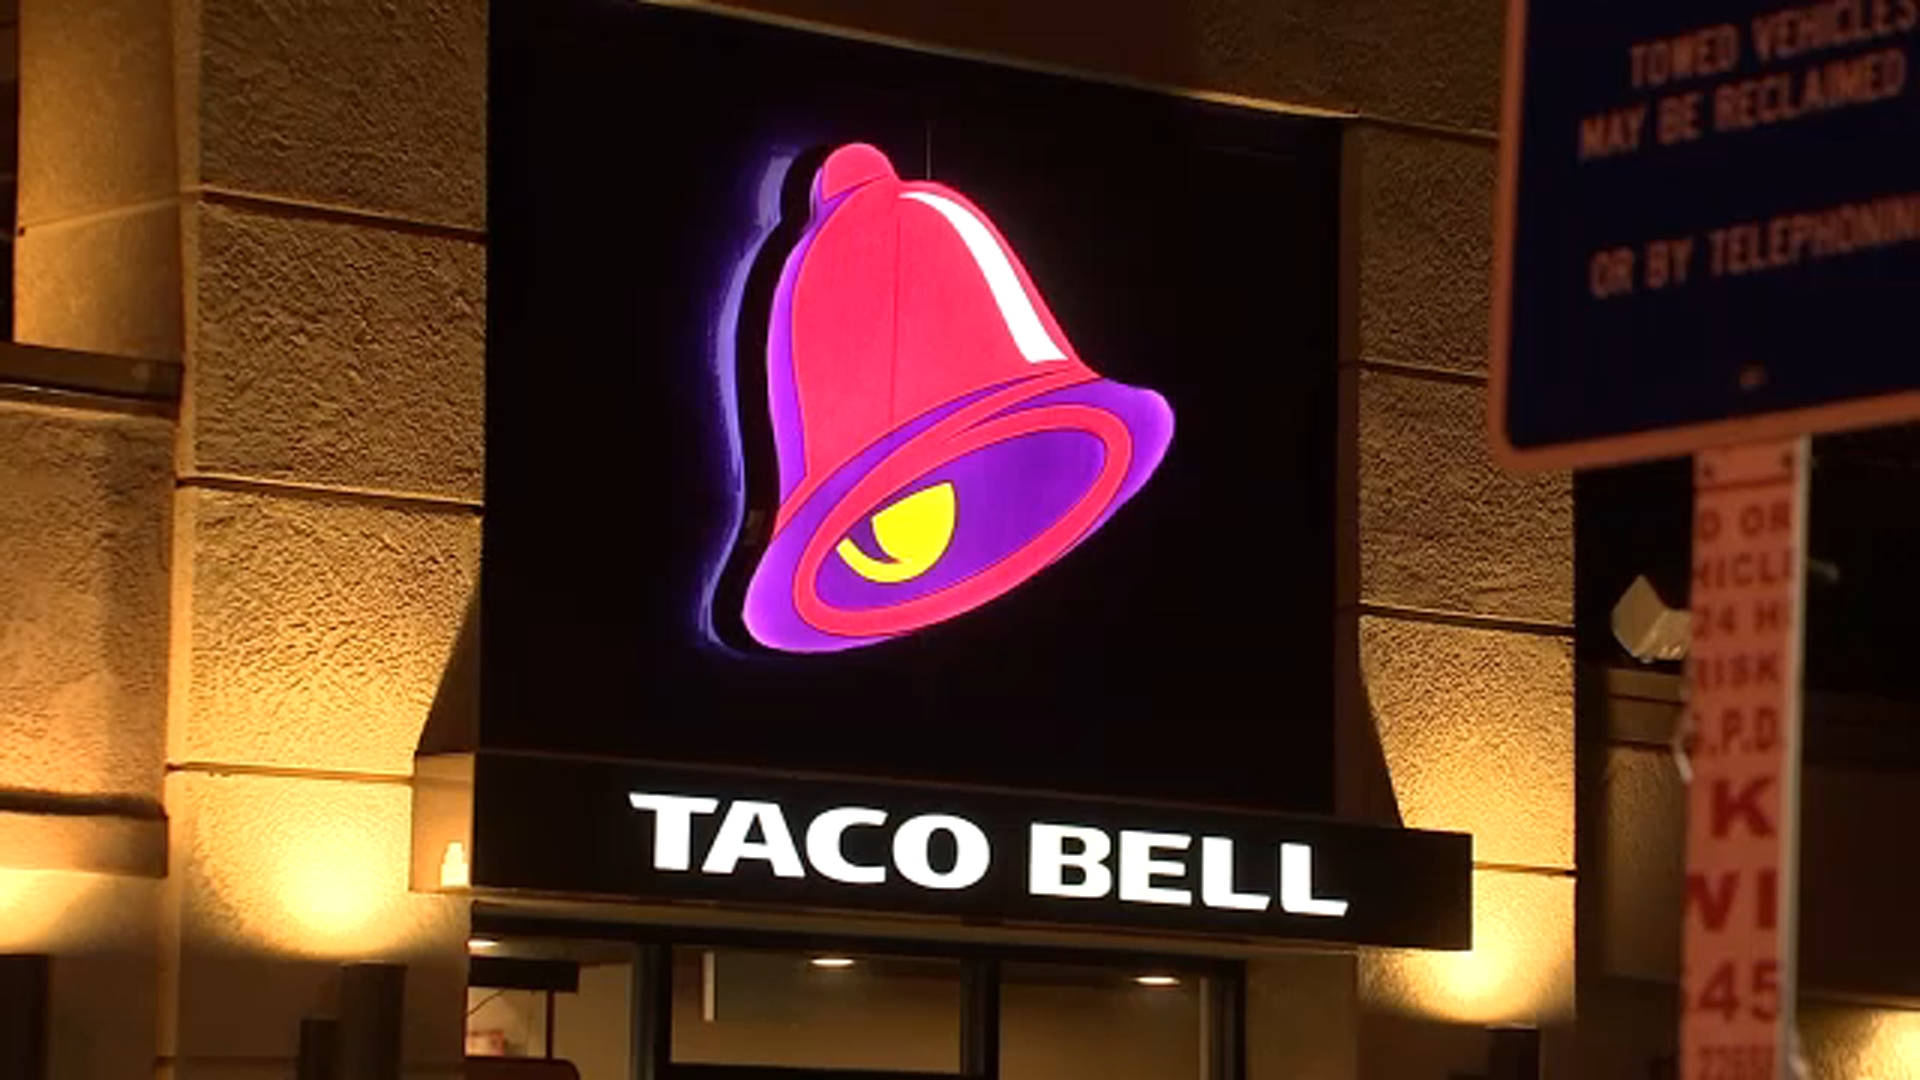 Taco Bell Glowing Signage Wallpaper